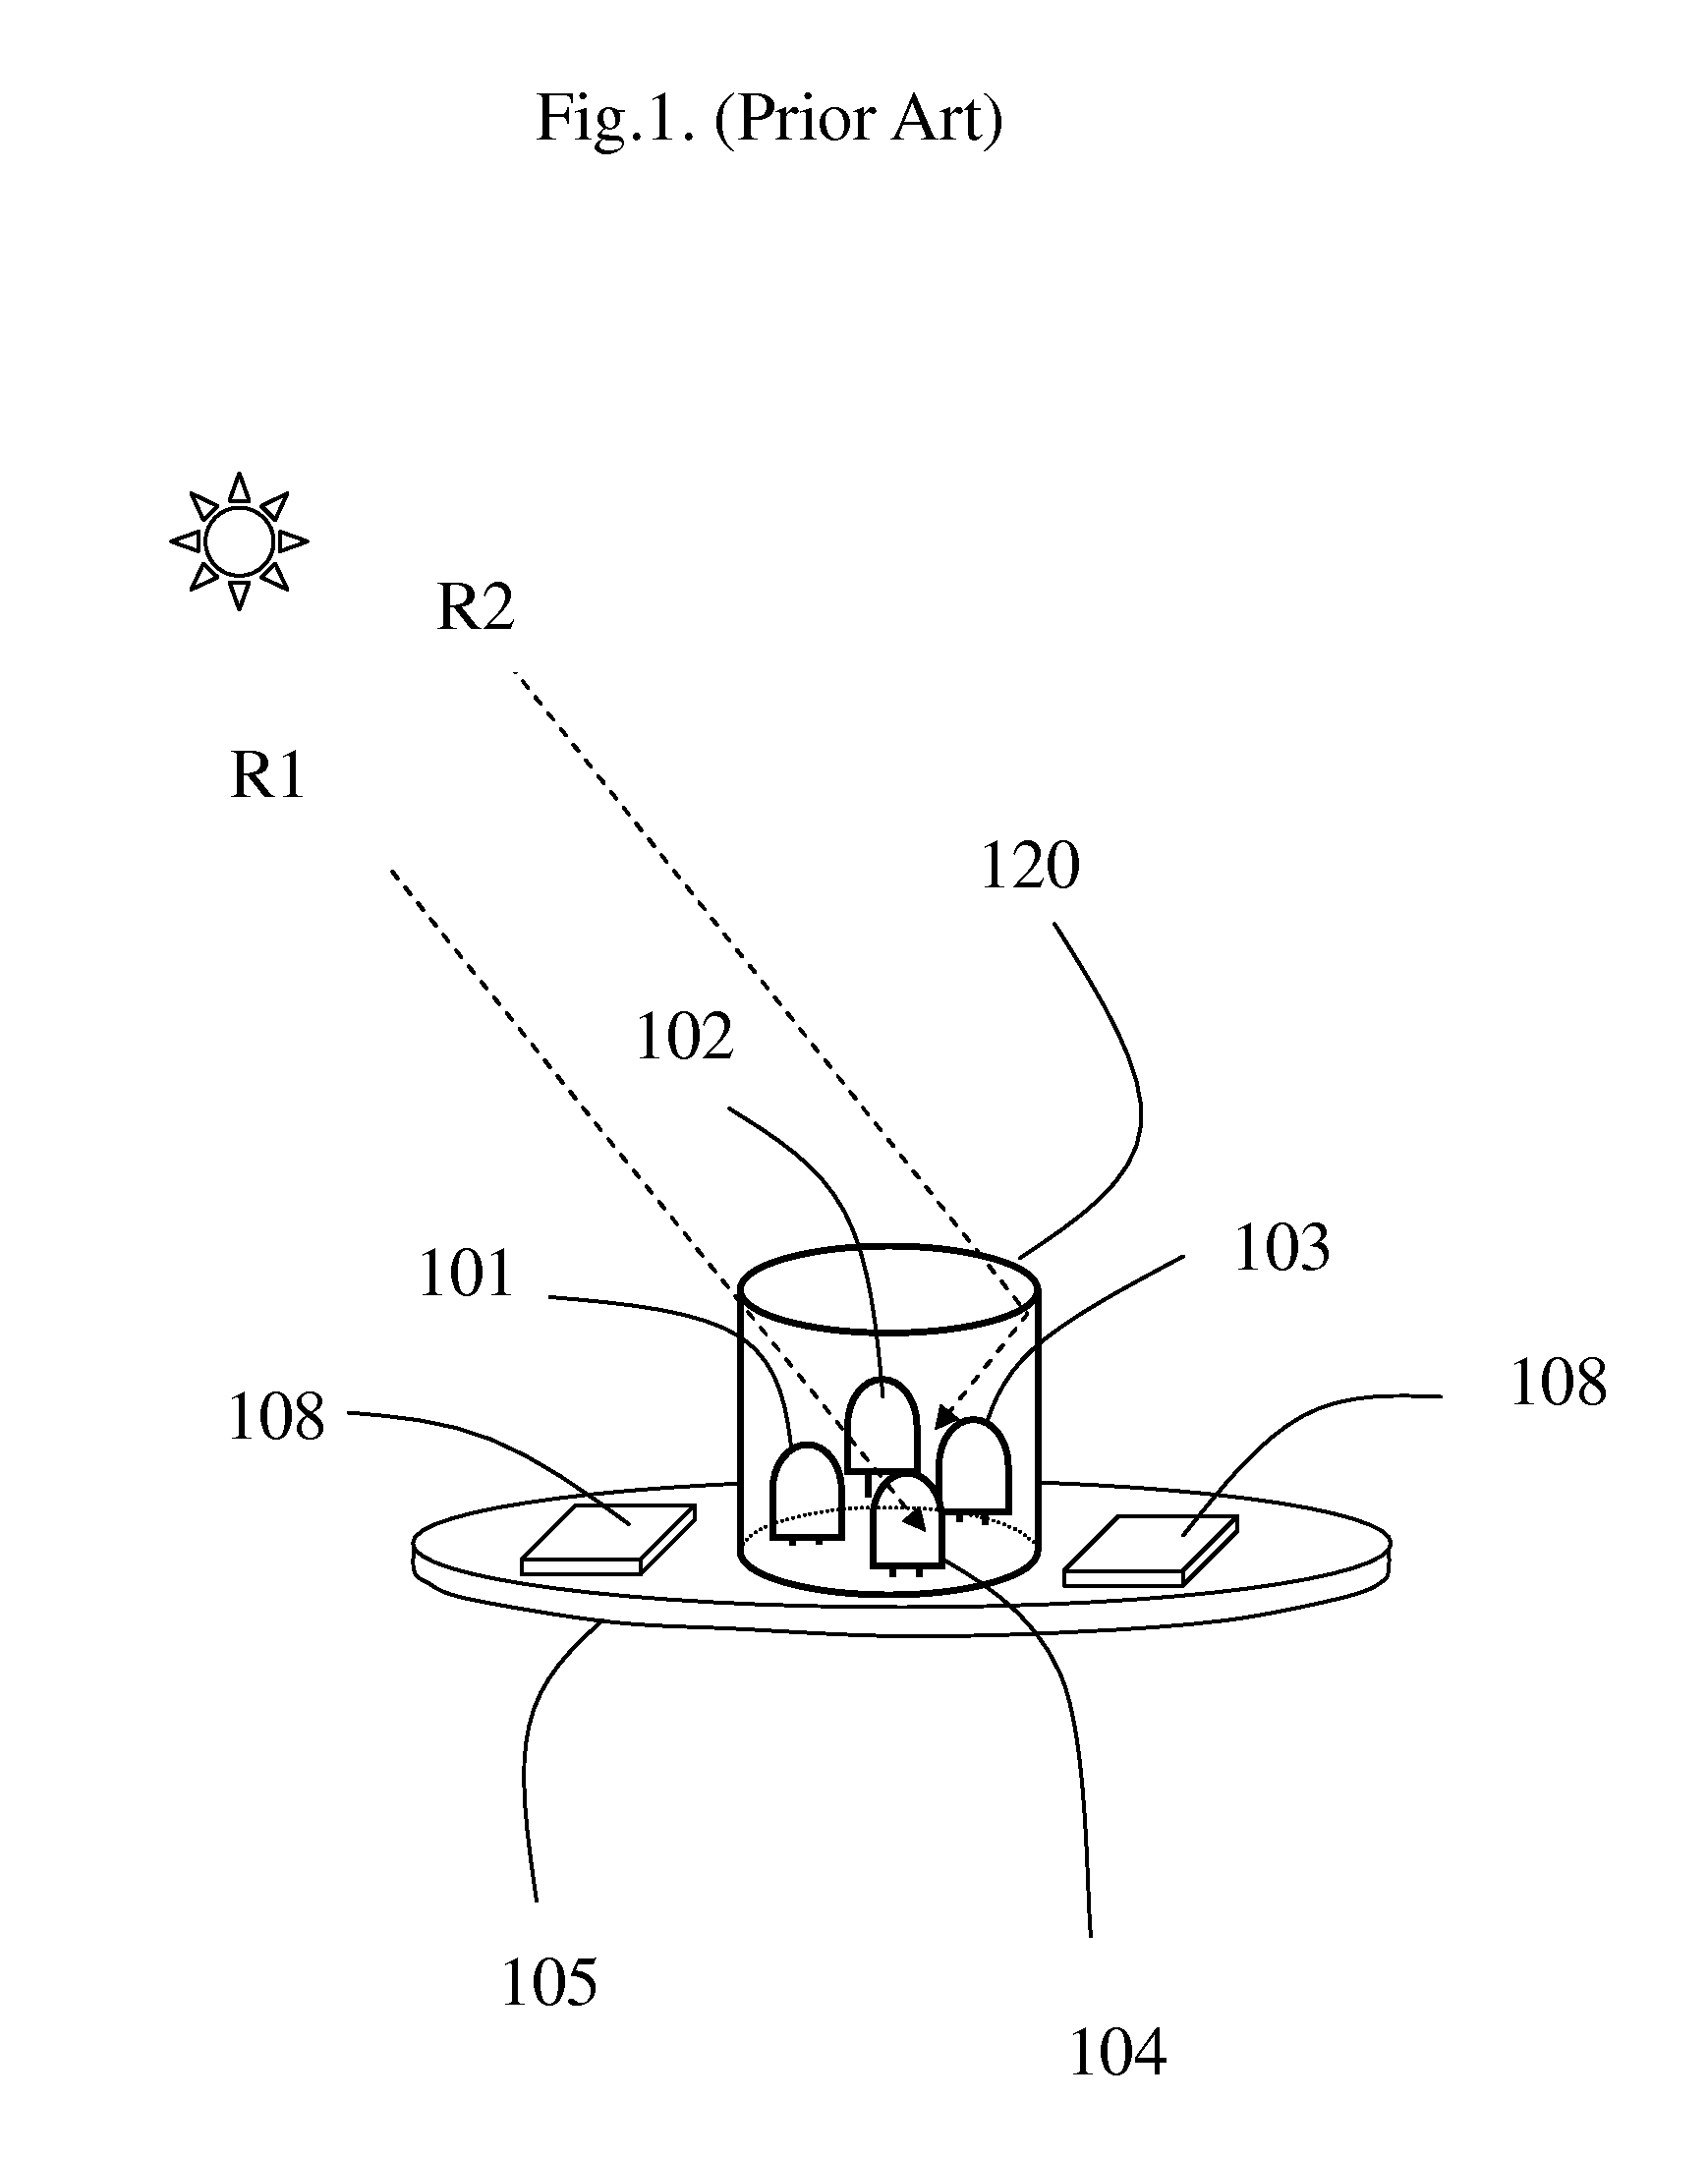 Sun tracking system for a solar panel